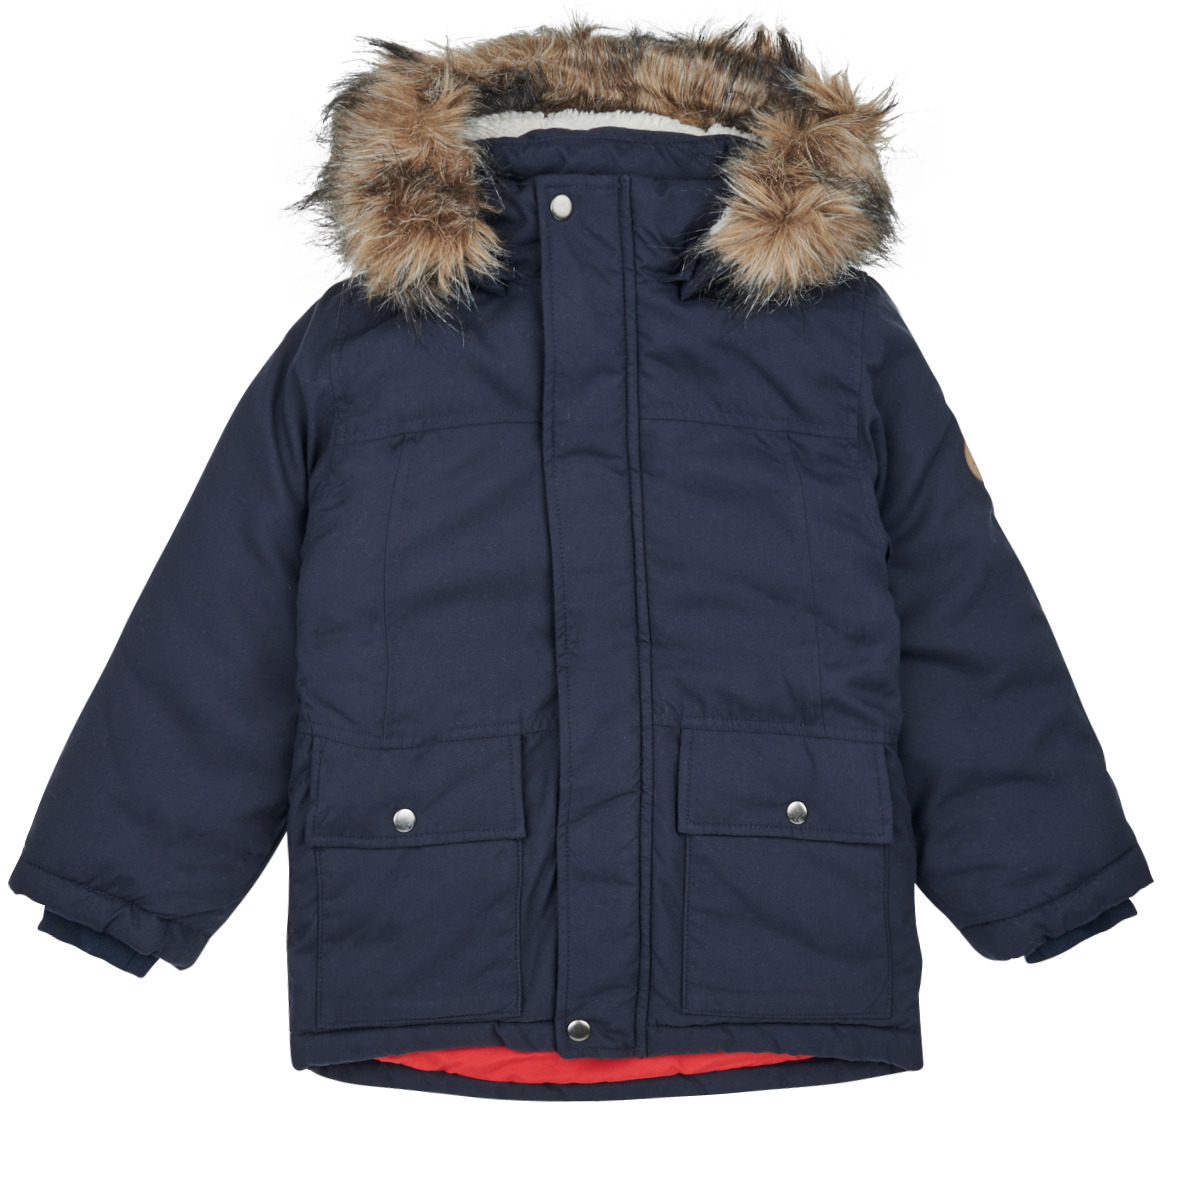 Name it NKMMARLIN PARKA NET PB | Child SOUTH JACKET - Spartoo Marine delivery Free Clothing Parkas ! 